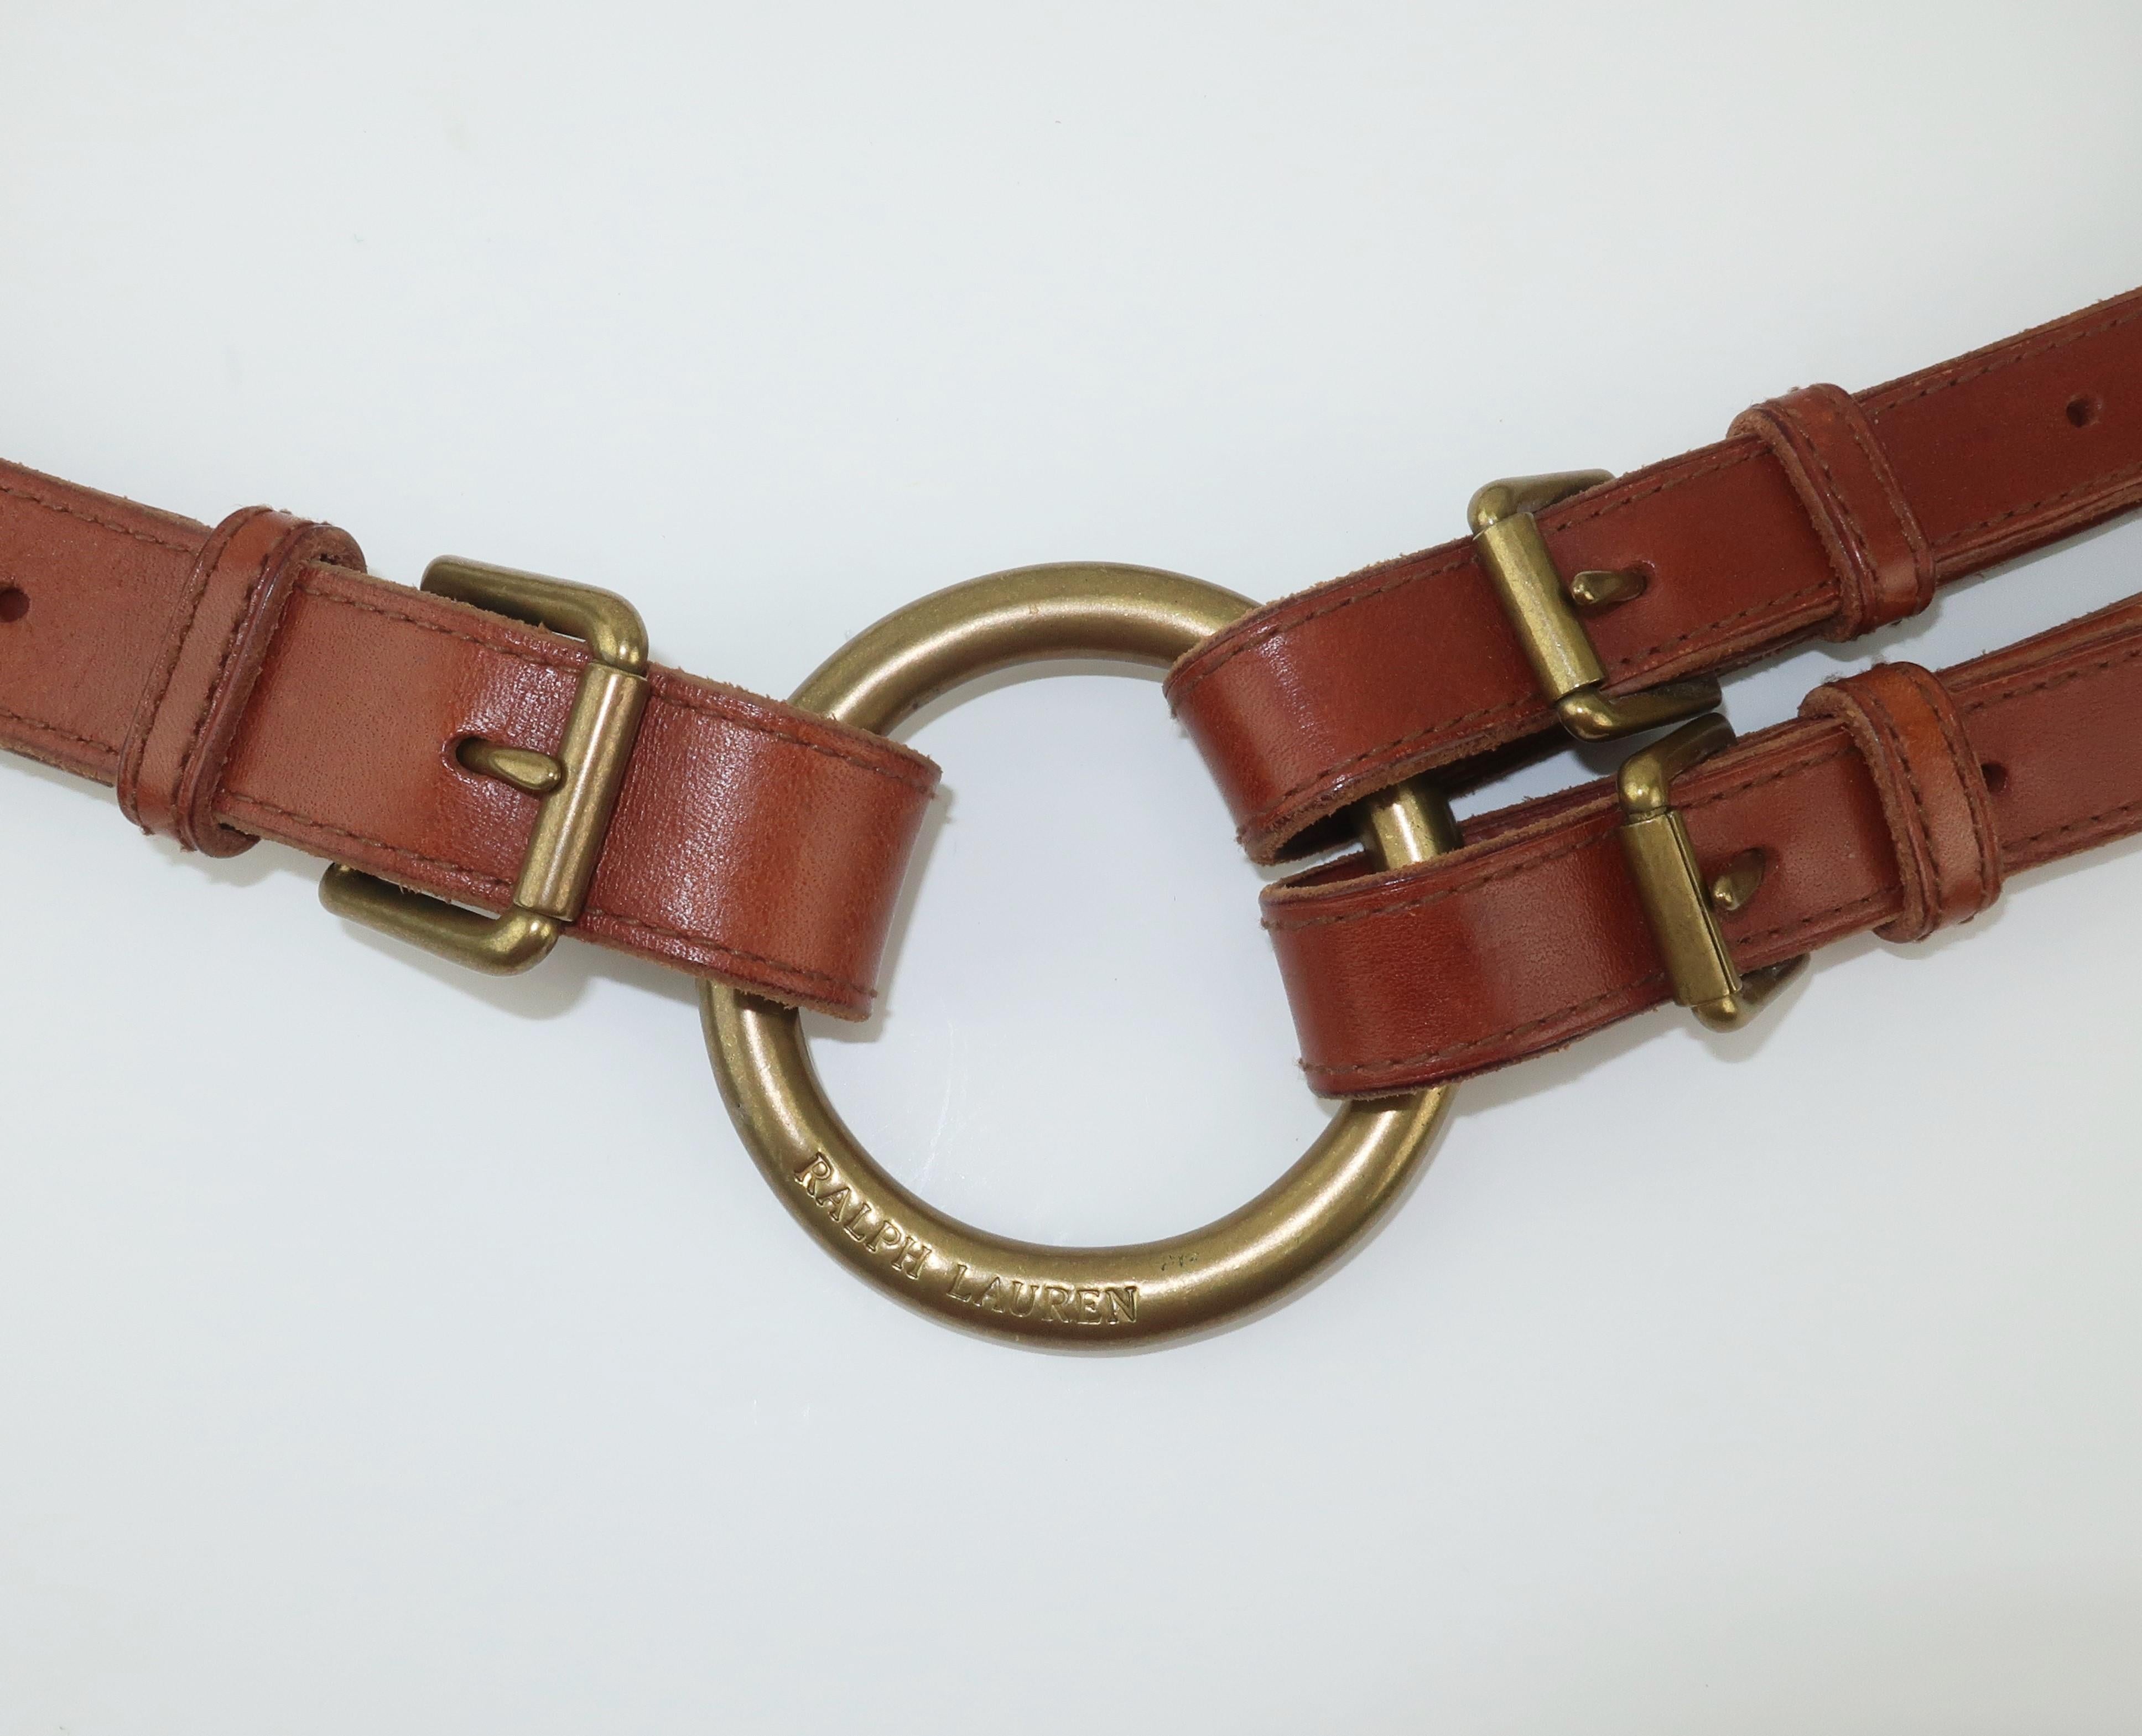 Ralph Lauren channeled a safari look with a nod to Moroccan exoticism in his Spring 2009 collection which included this handsome belt.  It can be worn in a multitude of ways and Mr. Lauren showed it with everything from harem pants to dressier